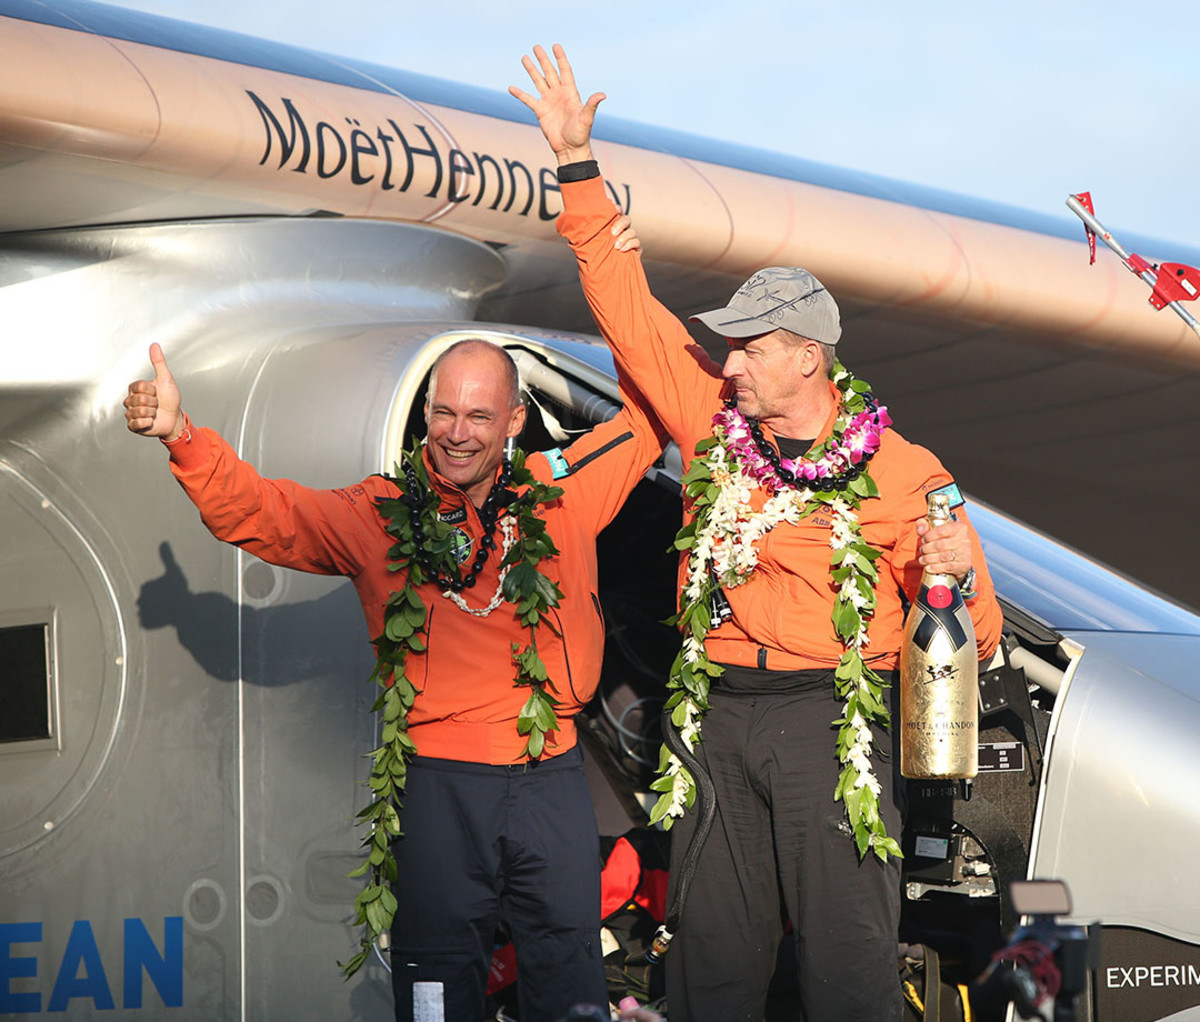 Bertrand Piccard and Andre Borschberg after landing their Solar Impulse 2 in Honolulu, Hawaii